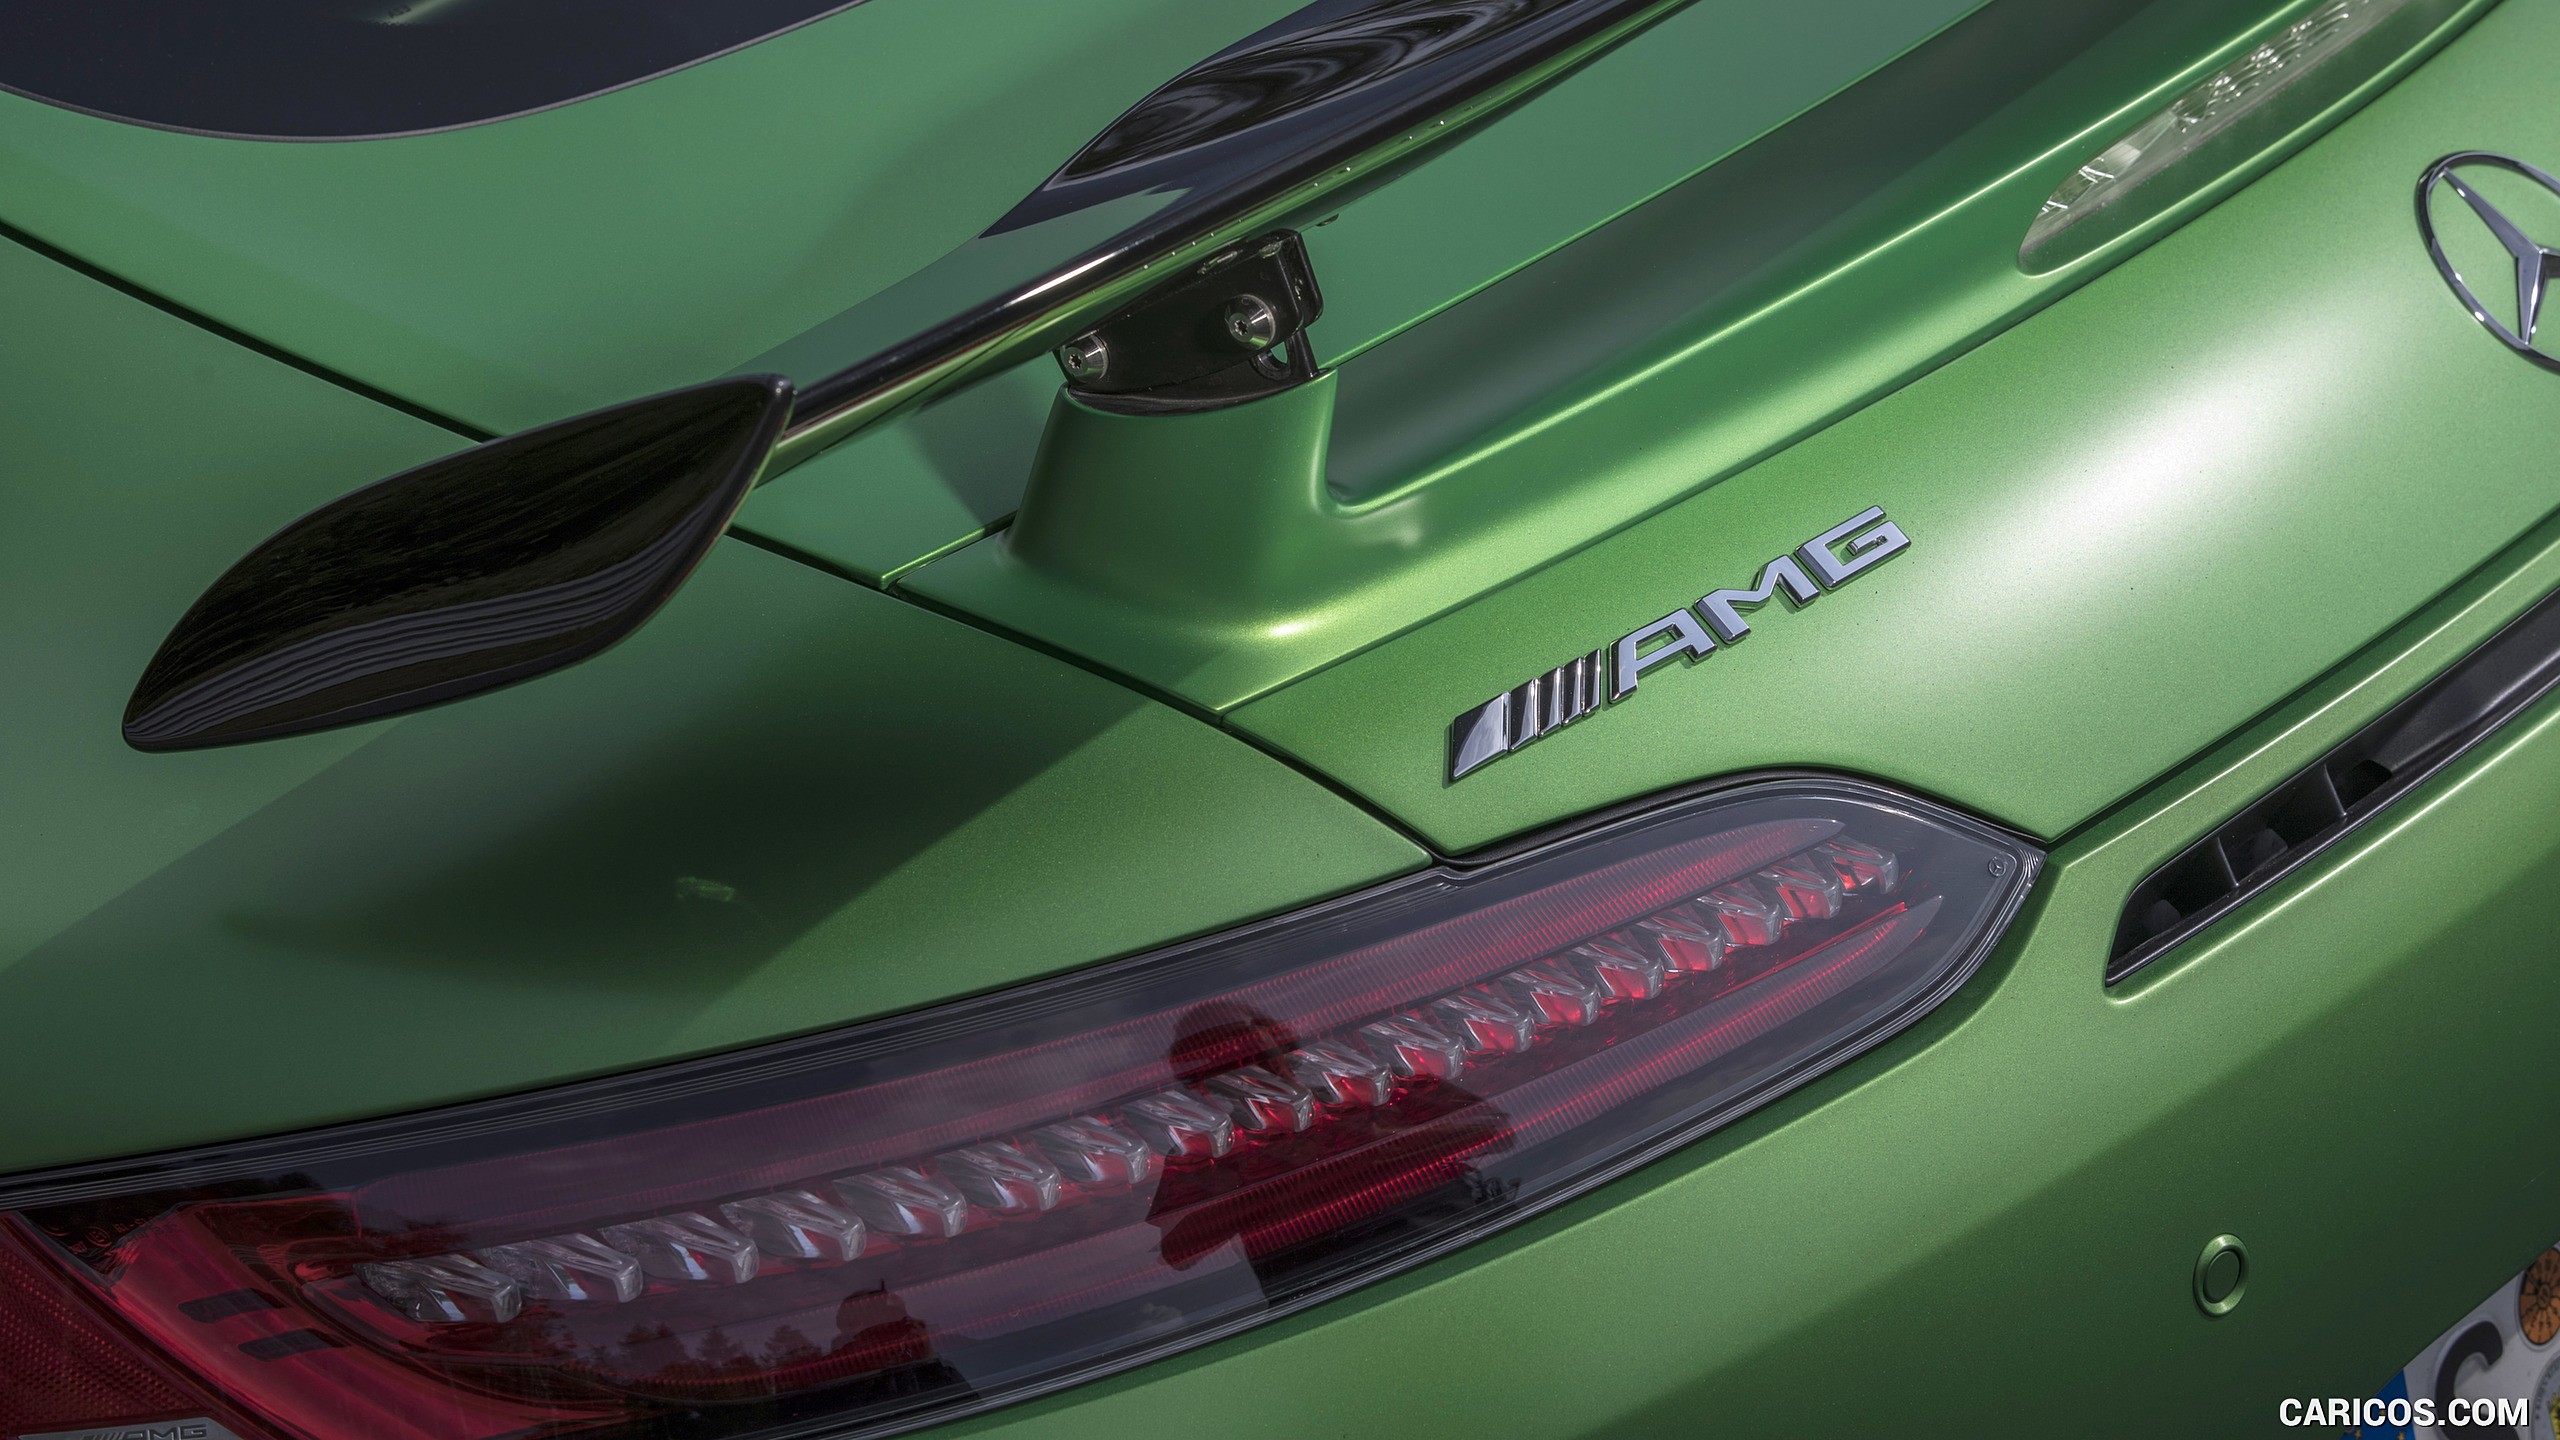 2017 Mercedes-AMG GT R Coupe - Spoiler, #176 of 182